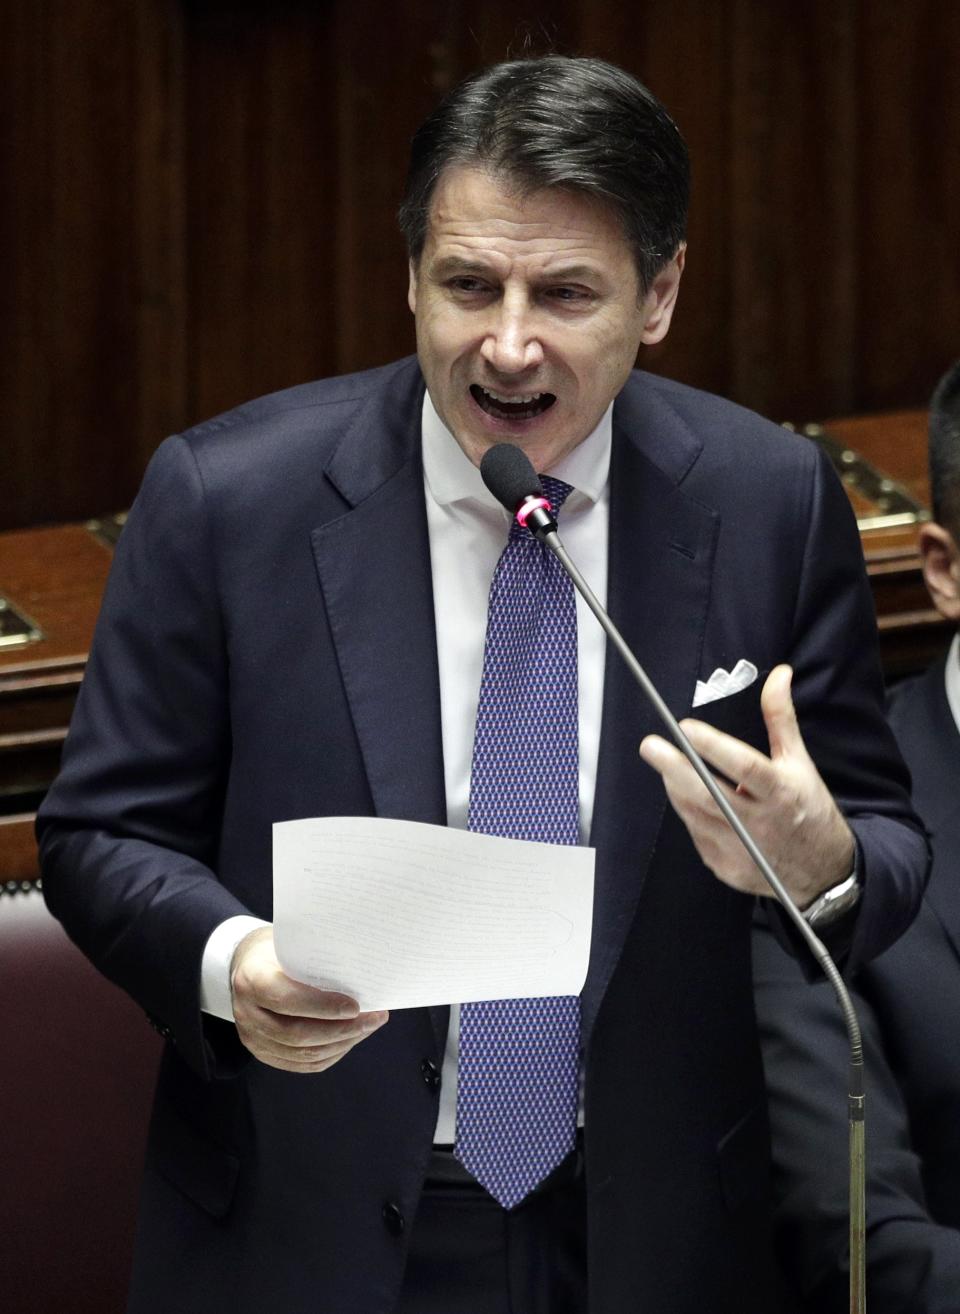 Italian Premier Giuseppe Conte addresses parliament ahead of confidence vote later at the Lower Chamber in Rome, Monday, Sept. 9, 2019. Conte is pitching for support in Parliament for his new left-leaning coalition ahead of crucial confidence votes. (AP Photo/Andrew Medichini)